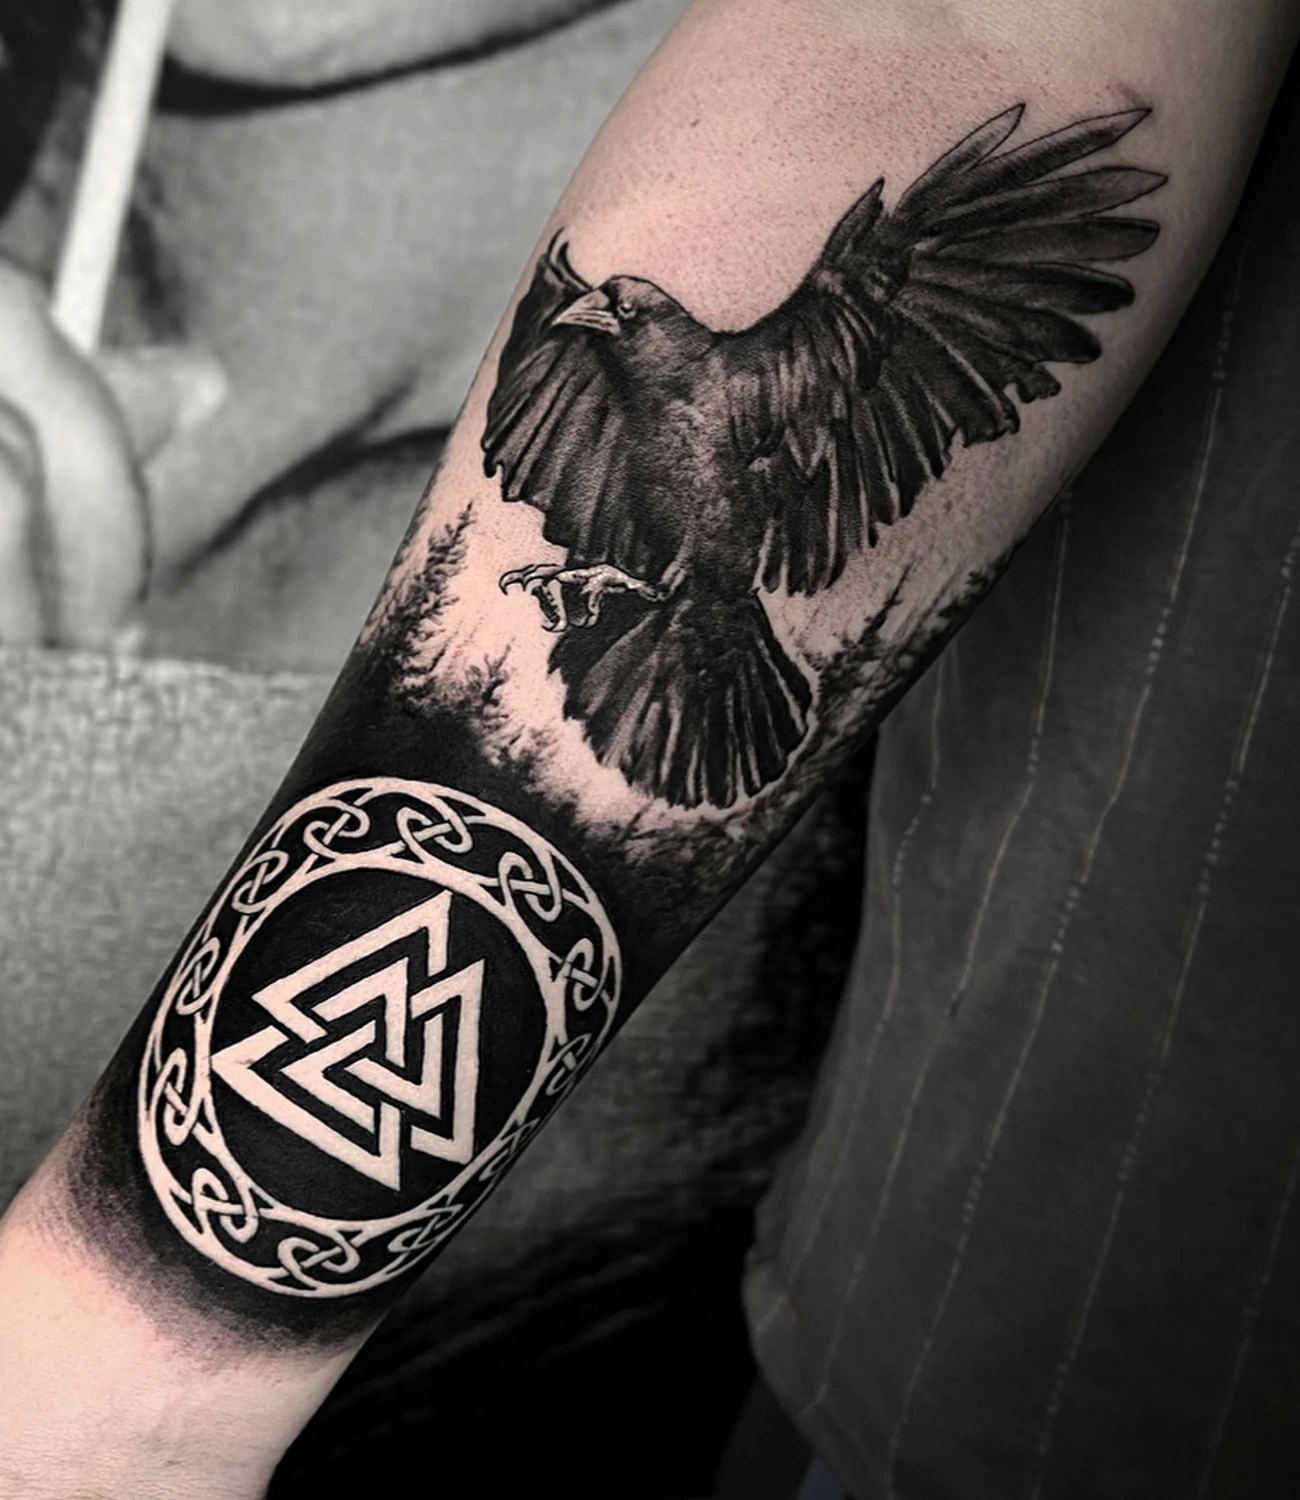 Raven viking tattoo: A combination of raven imagery with Viking symbols and motifs.